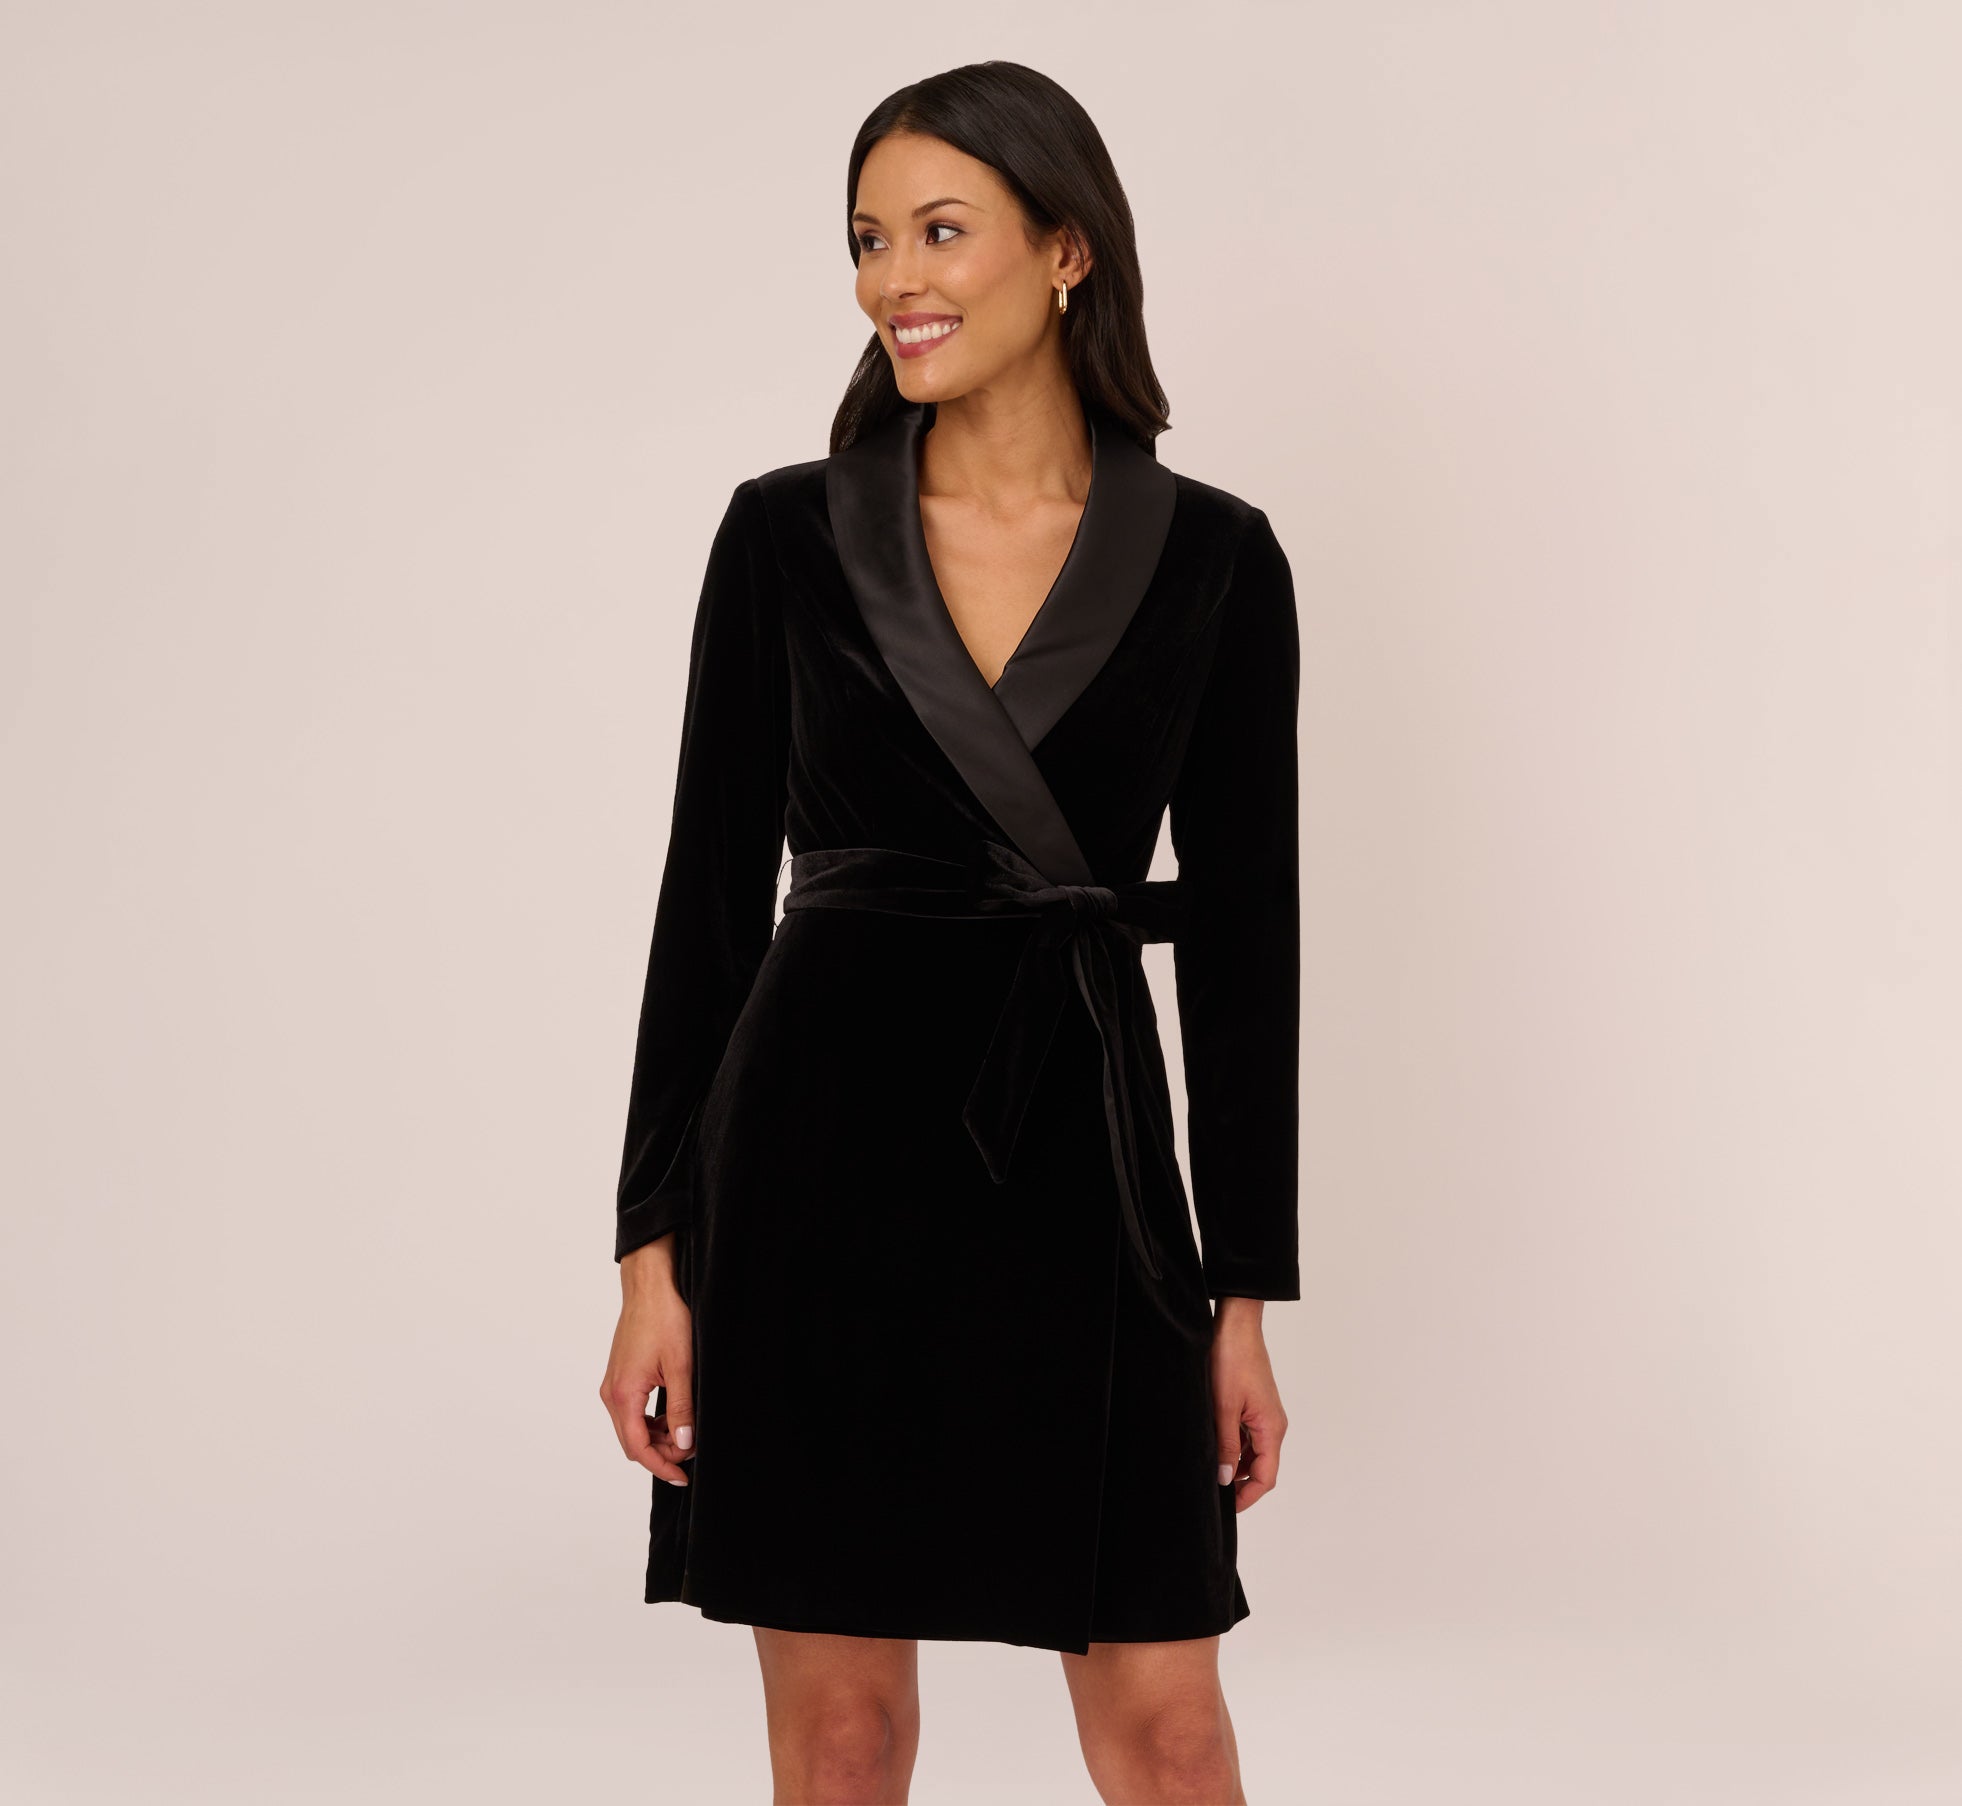 Missguided Black Tuxedo Long Dress, $68 | Missguided | Lookastic